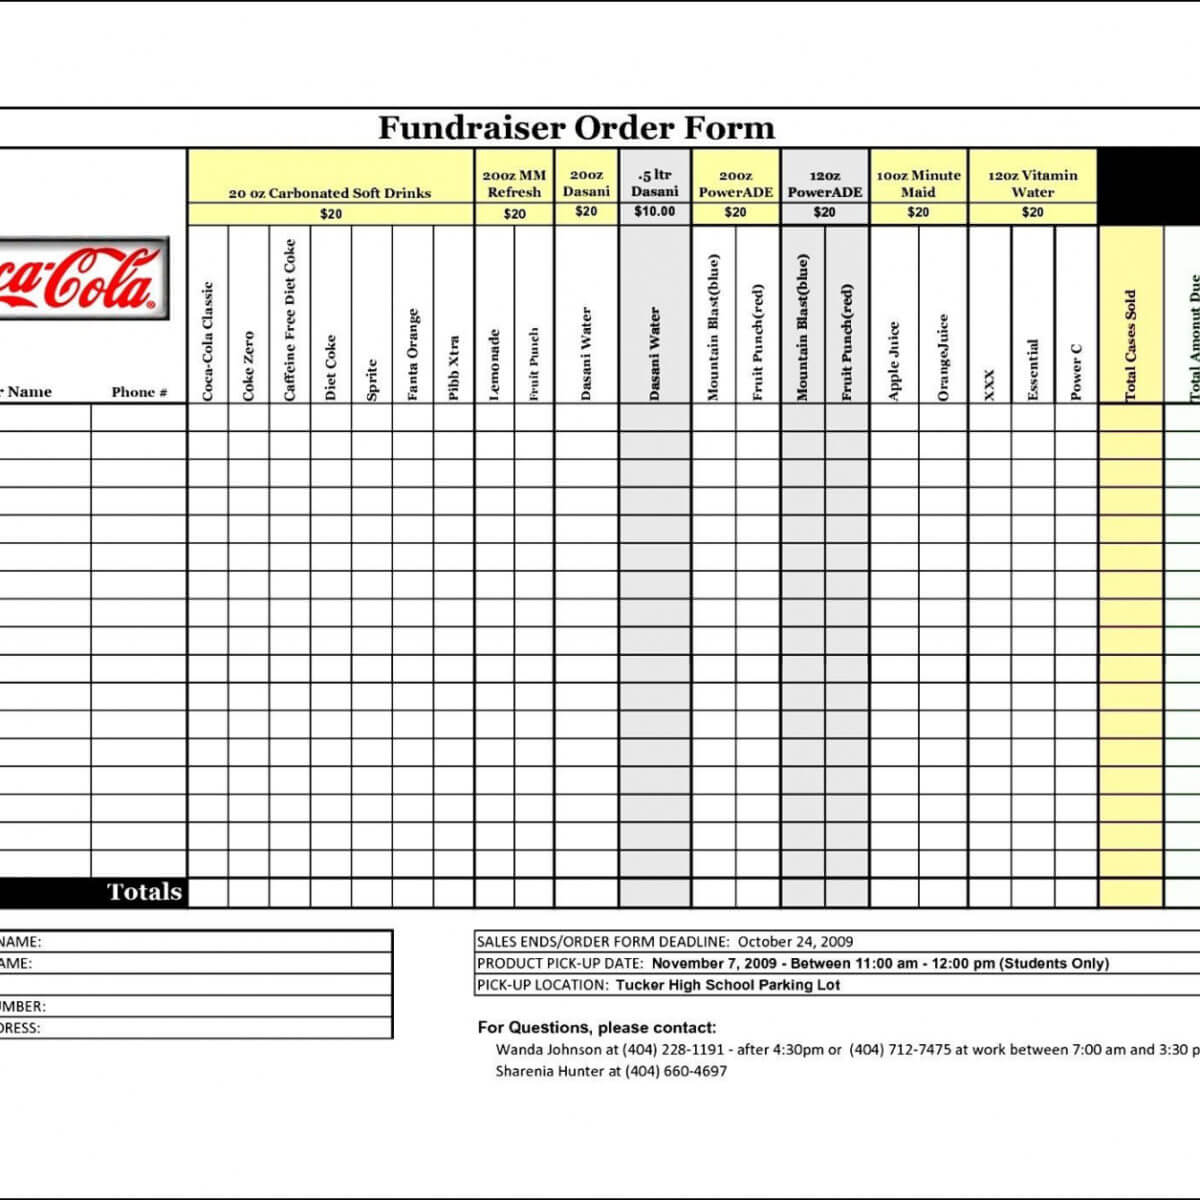 Printable 001 Fundraiser Order Form Template Incredible Inside Blank Fundraiser Order Form Template